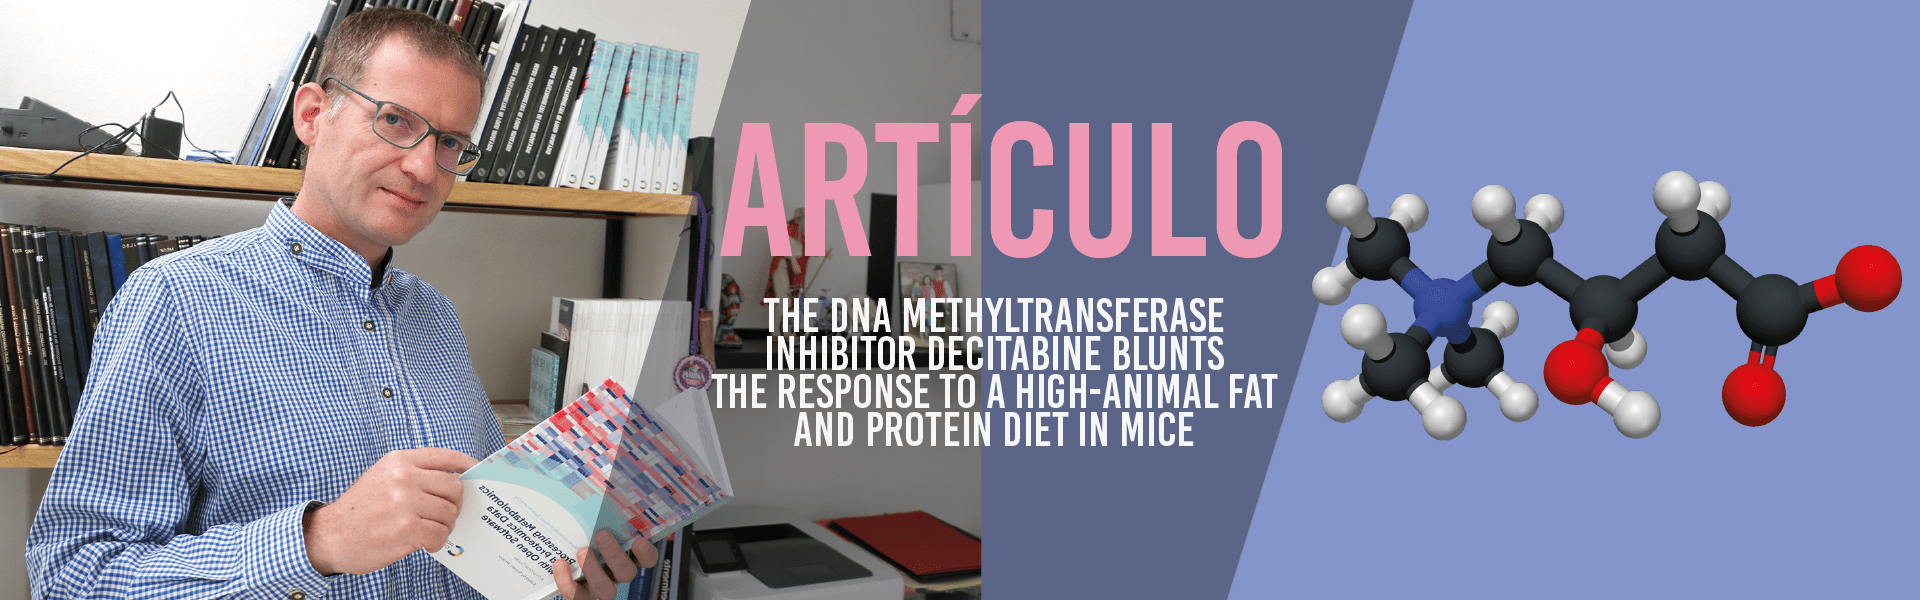 The DNA methyltransferase inhibitor decitabine blunts the response to a high-animal fat and protein diet in mice